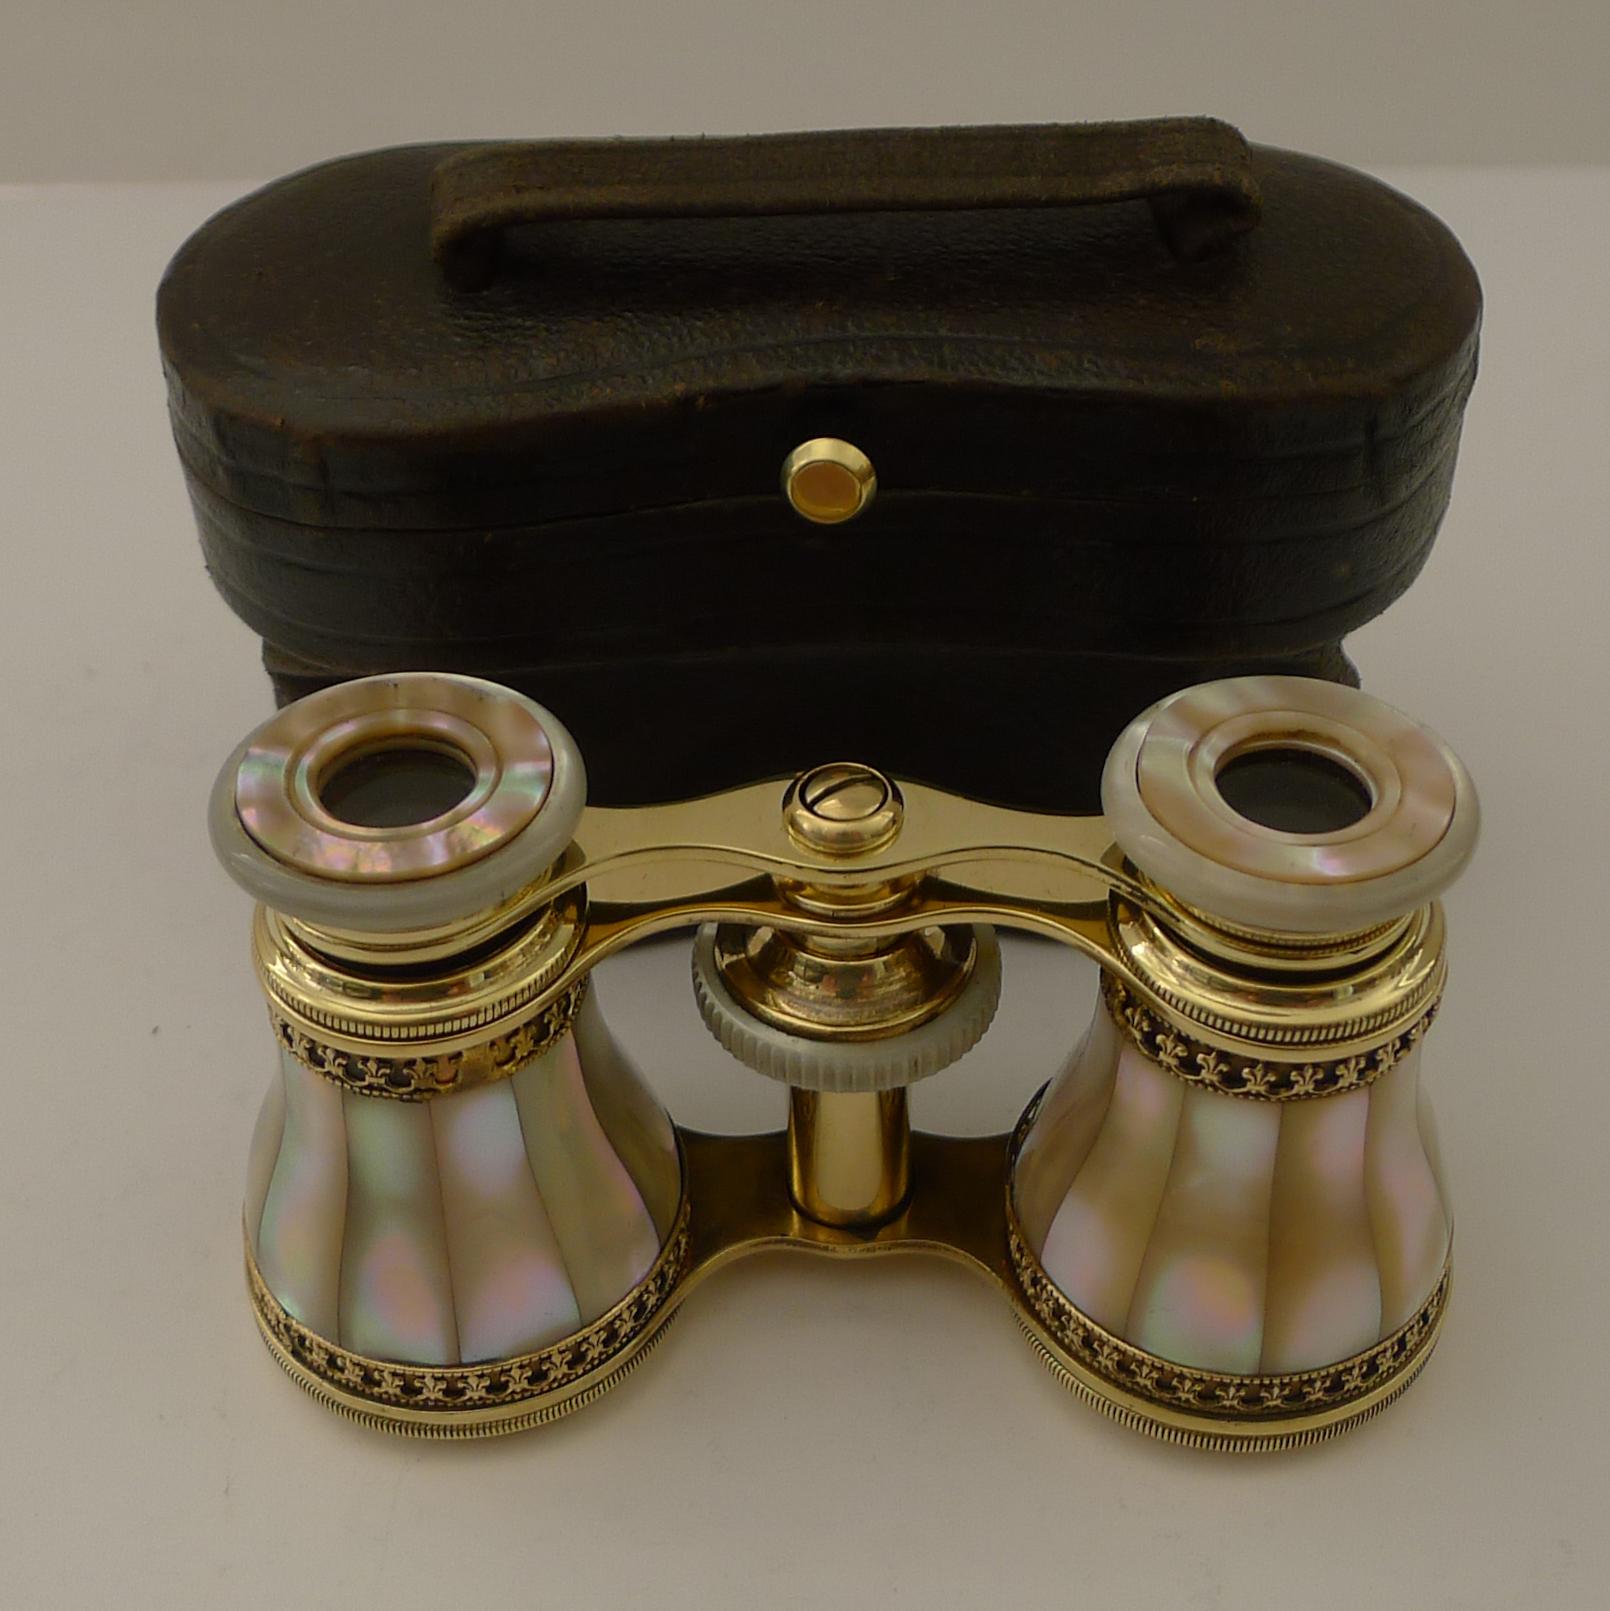 A superb pair of early twentieth century opera glasses clad in iridescent Mother of Pearl or Nacre shell and decorated with Fleur de Lys filigree borders to top and bottom.

They have been meticulously and professionally cleaned and polished,